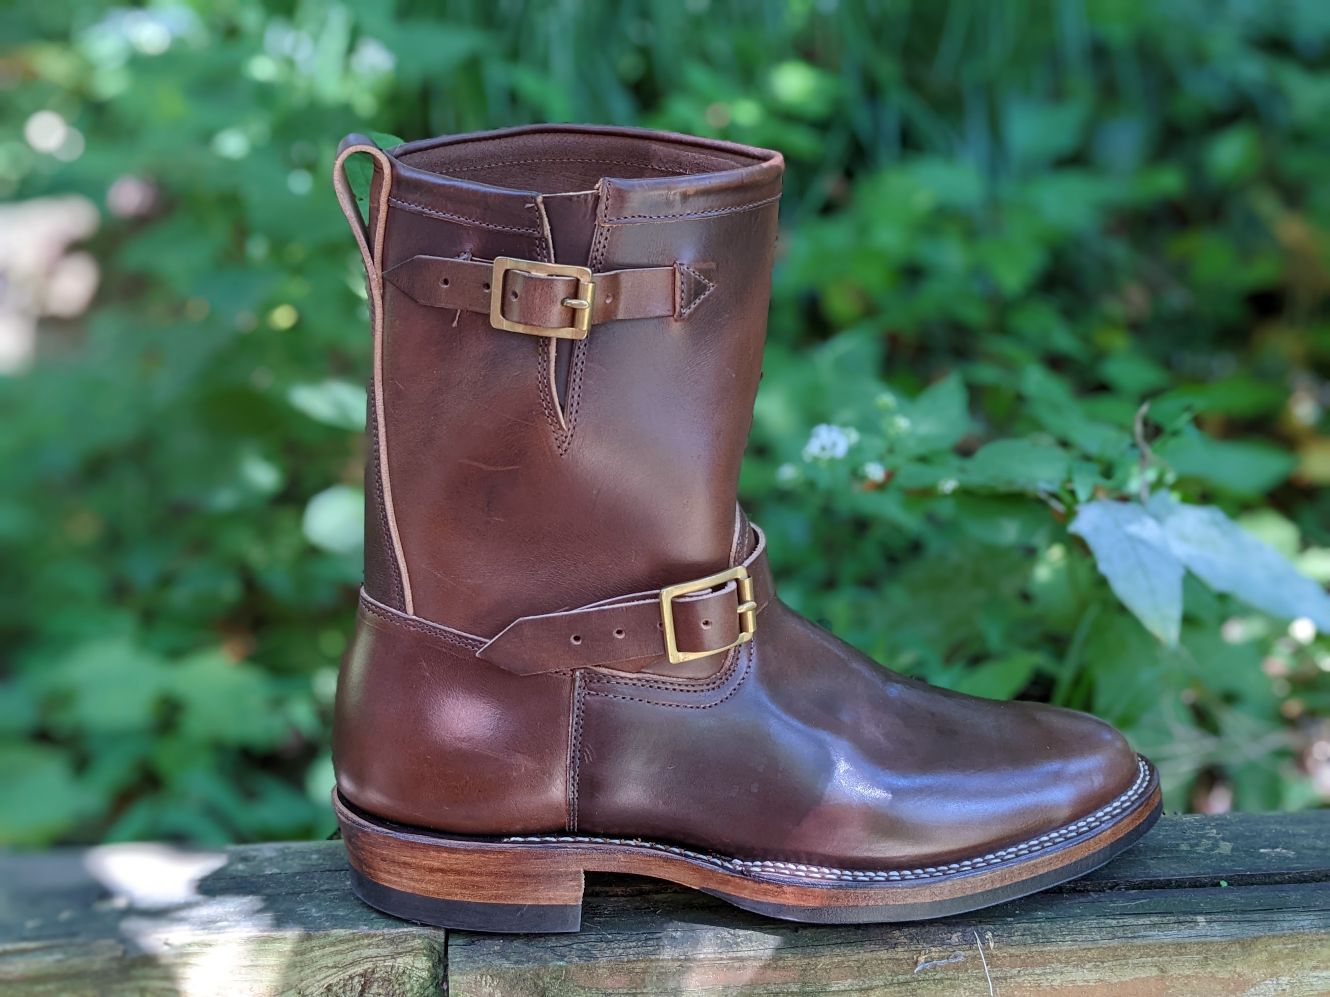 Viberg Engineer Boots: Out of My Comfort Zone?